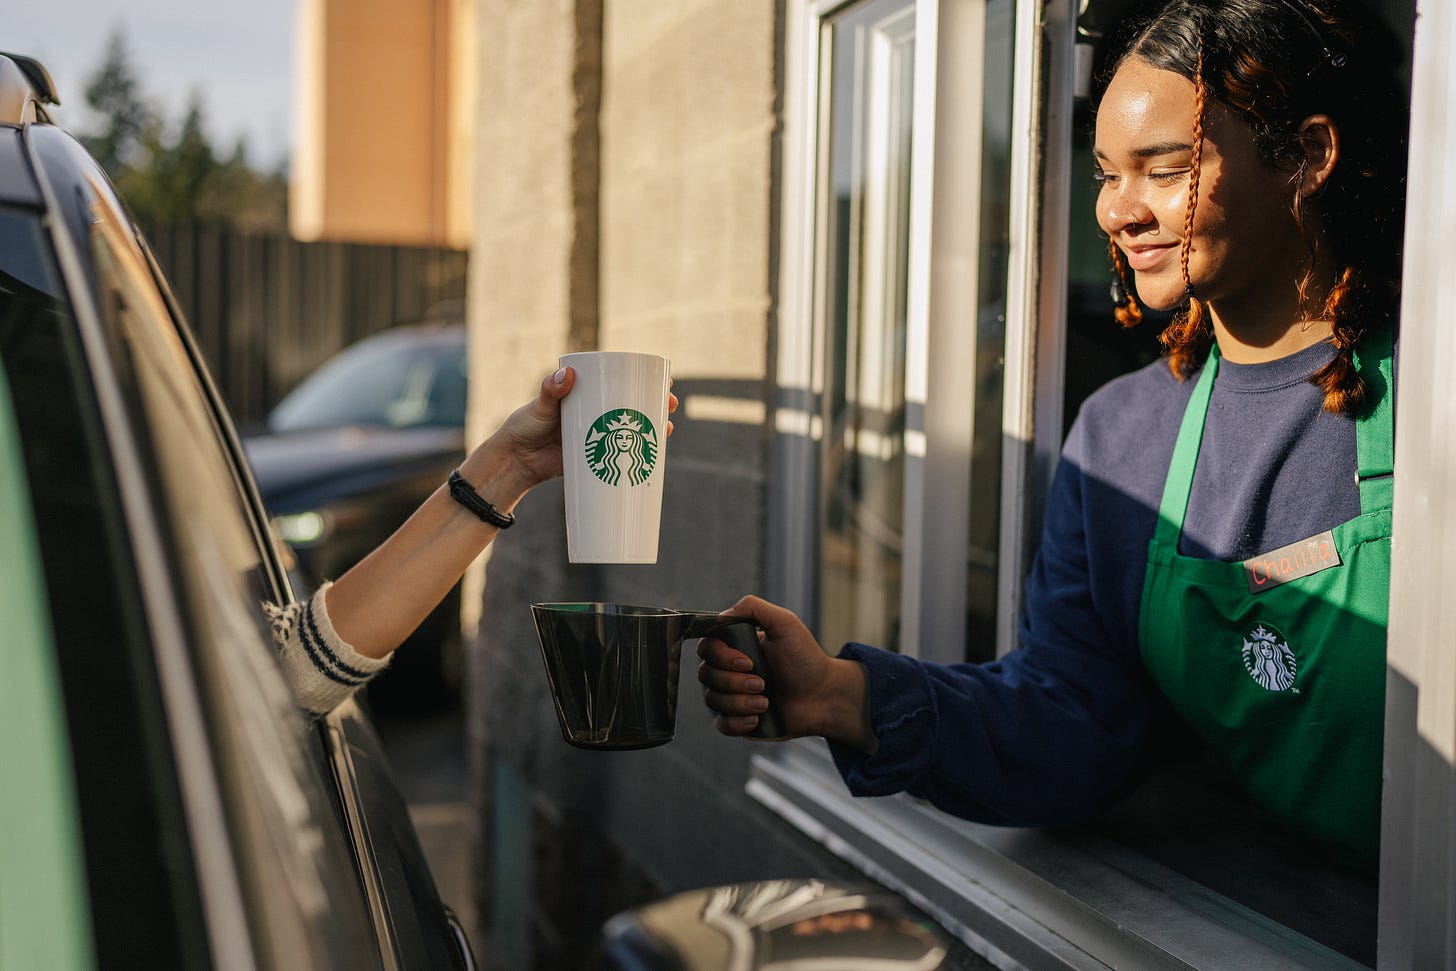 Starbucks launches Reusable Cup Option for Drive-Thru and Mobile Orders.